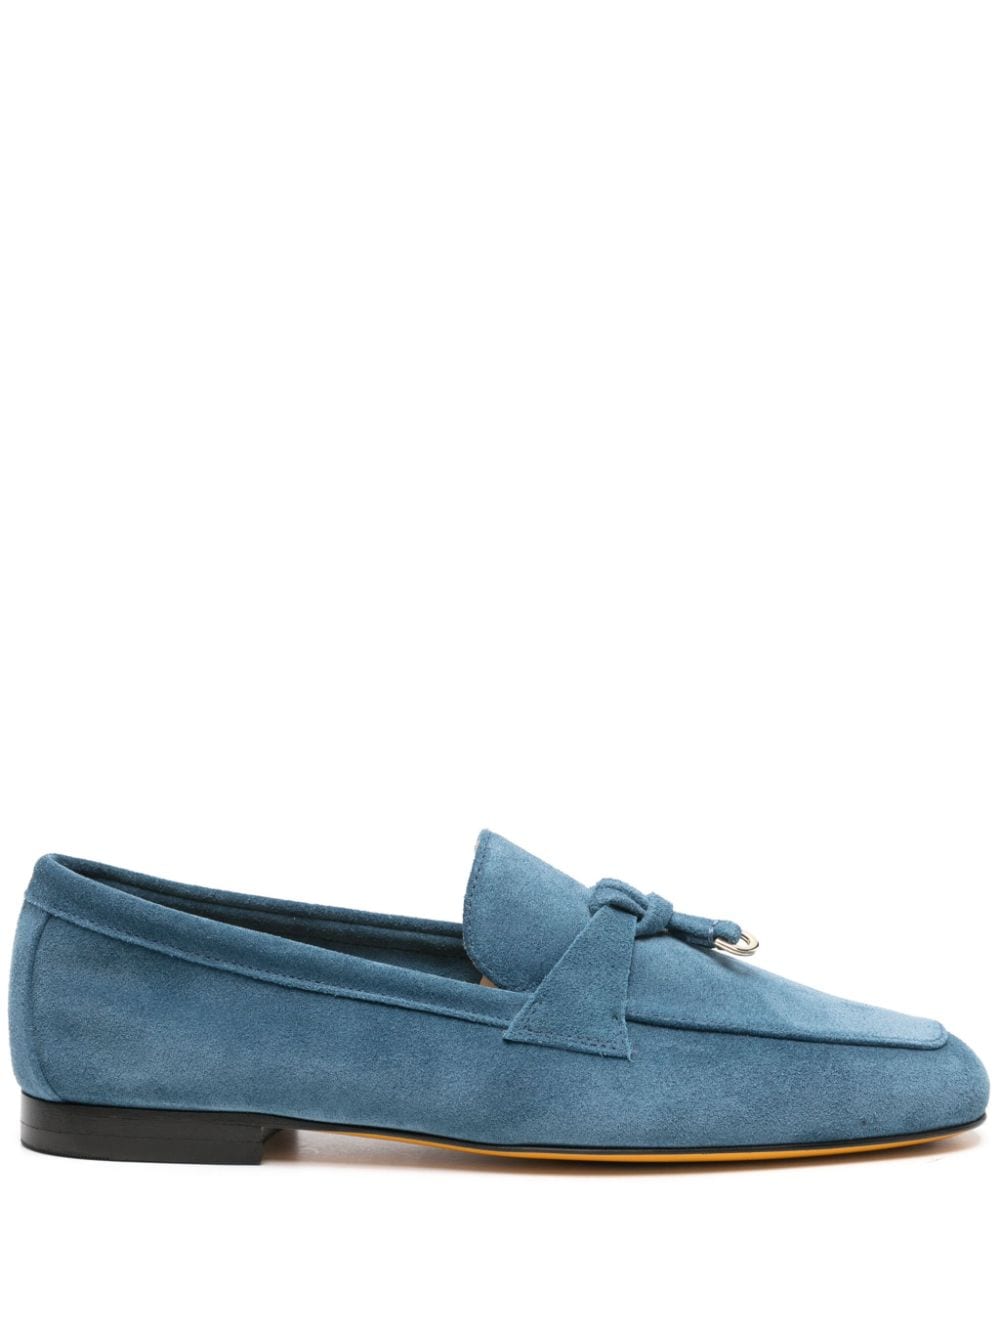 Doucal's knot-detail suede loafers - Blue von Doucal's